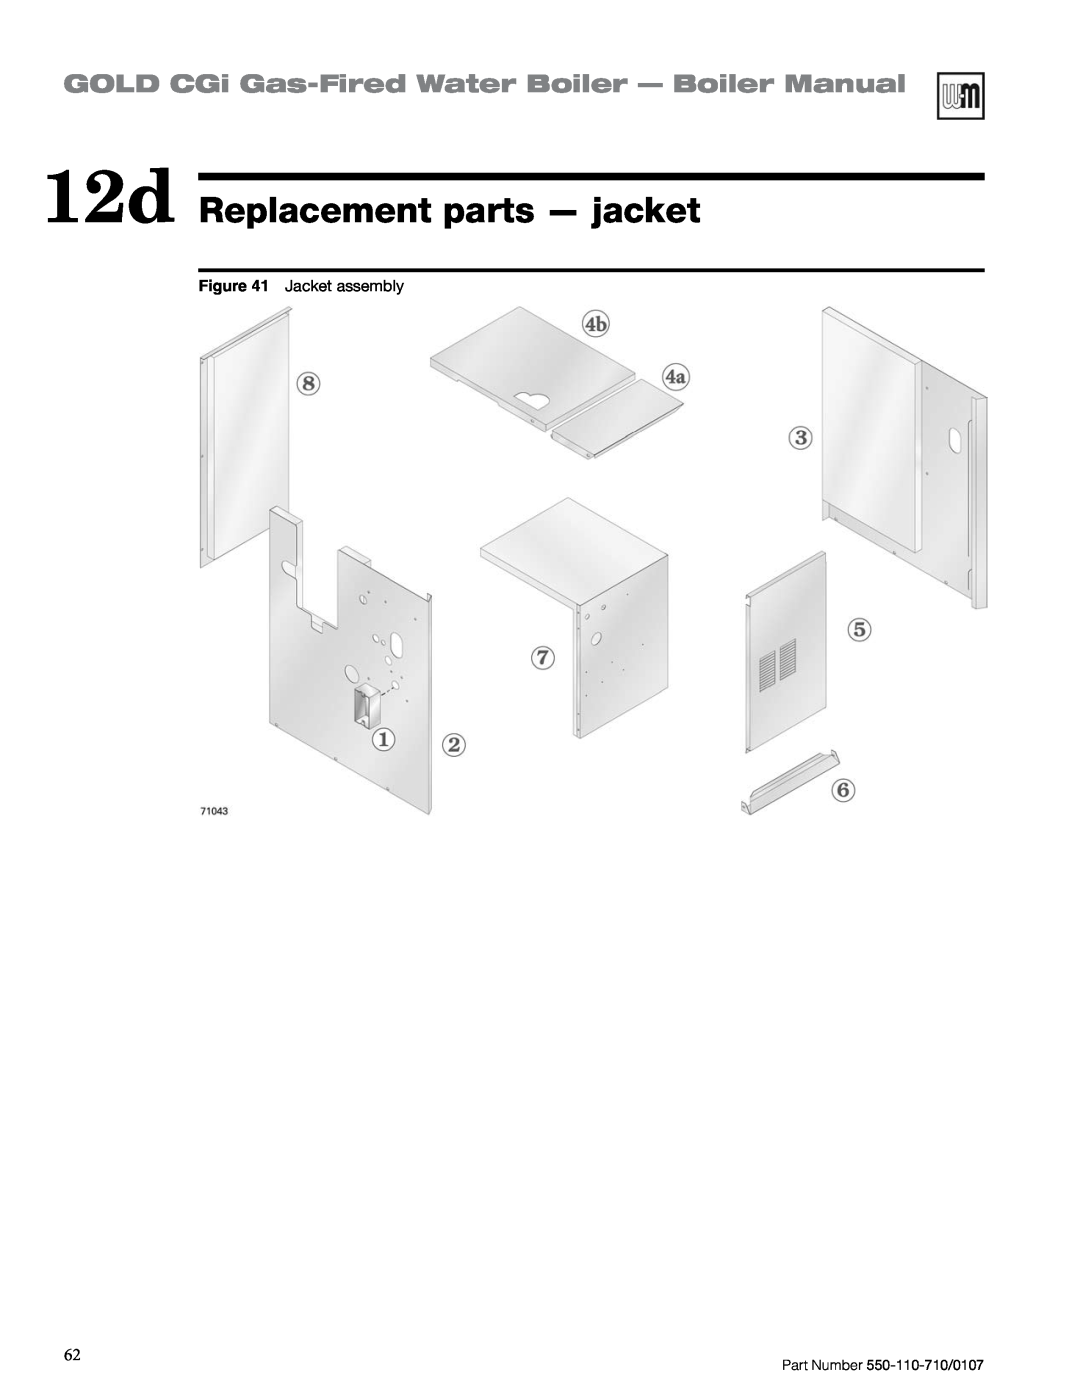 Weil-McLain Series 2 manual 12d Replacement parts — jacket, GOLD CGi Gas-FiredWater Boiler — Boiler Manual, Jacket assembly 